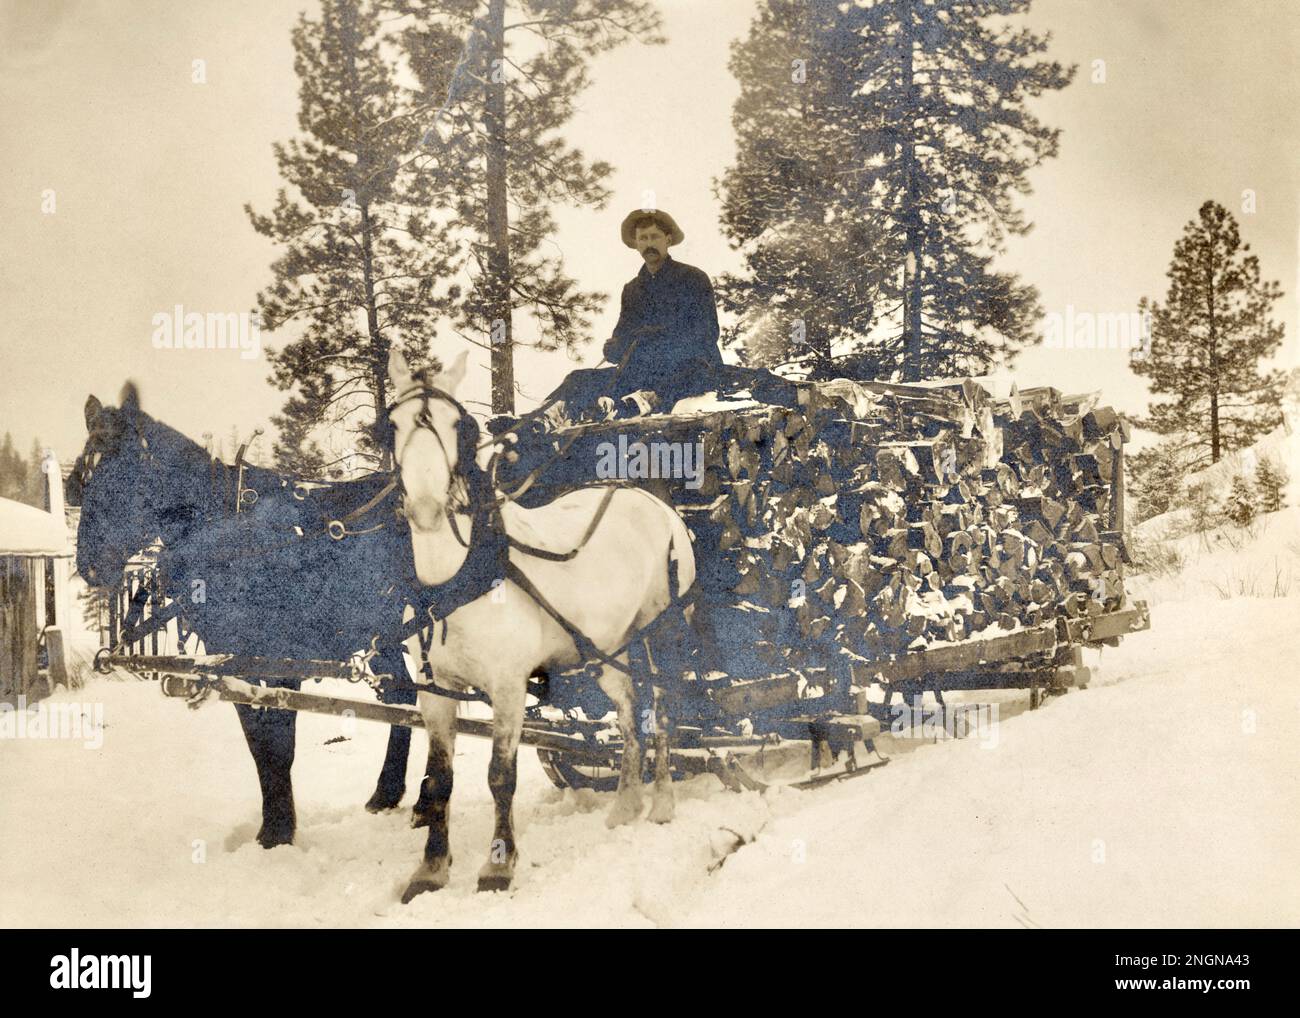 Horse and Sleigh with Wood Logs, 1900s, Turn of the Century Stock Photo